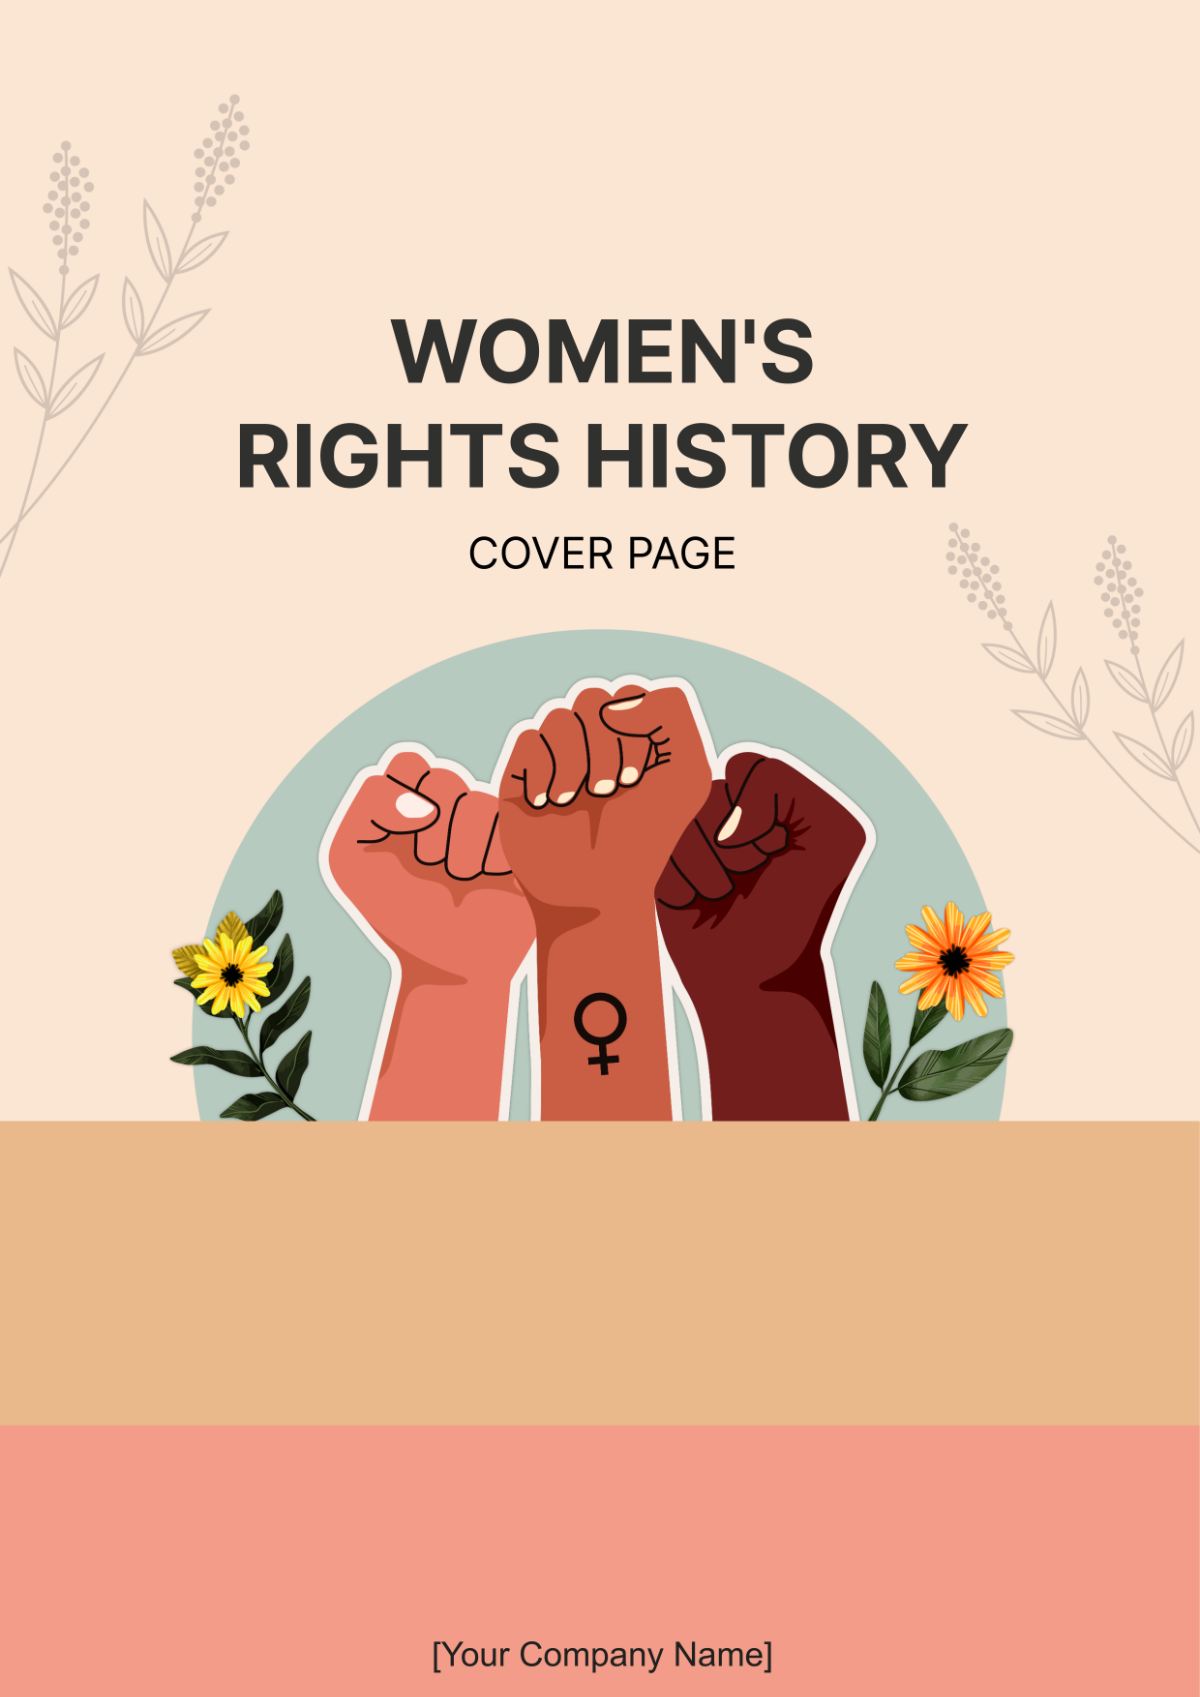 Women's Rights History Cover Page